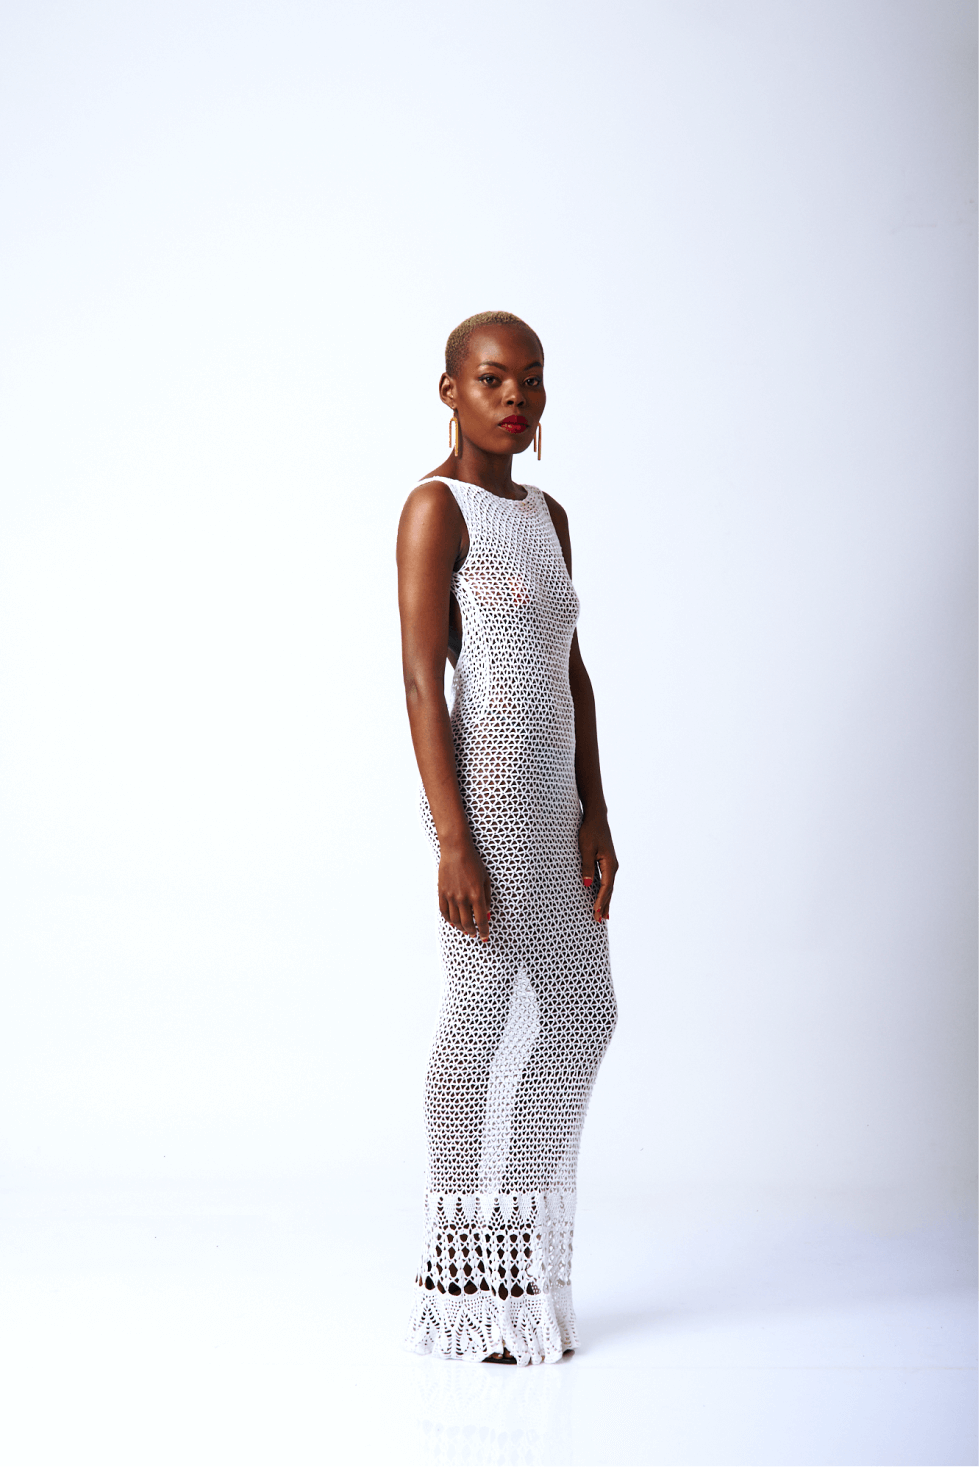 Shop Della Maxi Dress by Olisa Kenya on Arrai. Discover stylish, affordable clothing, jewelry, handbags and unique handmade pieces from top Kenyan & African fashion brands prioritising sustainability and quality craftsmanship.